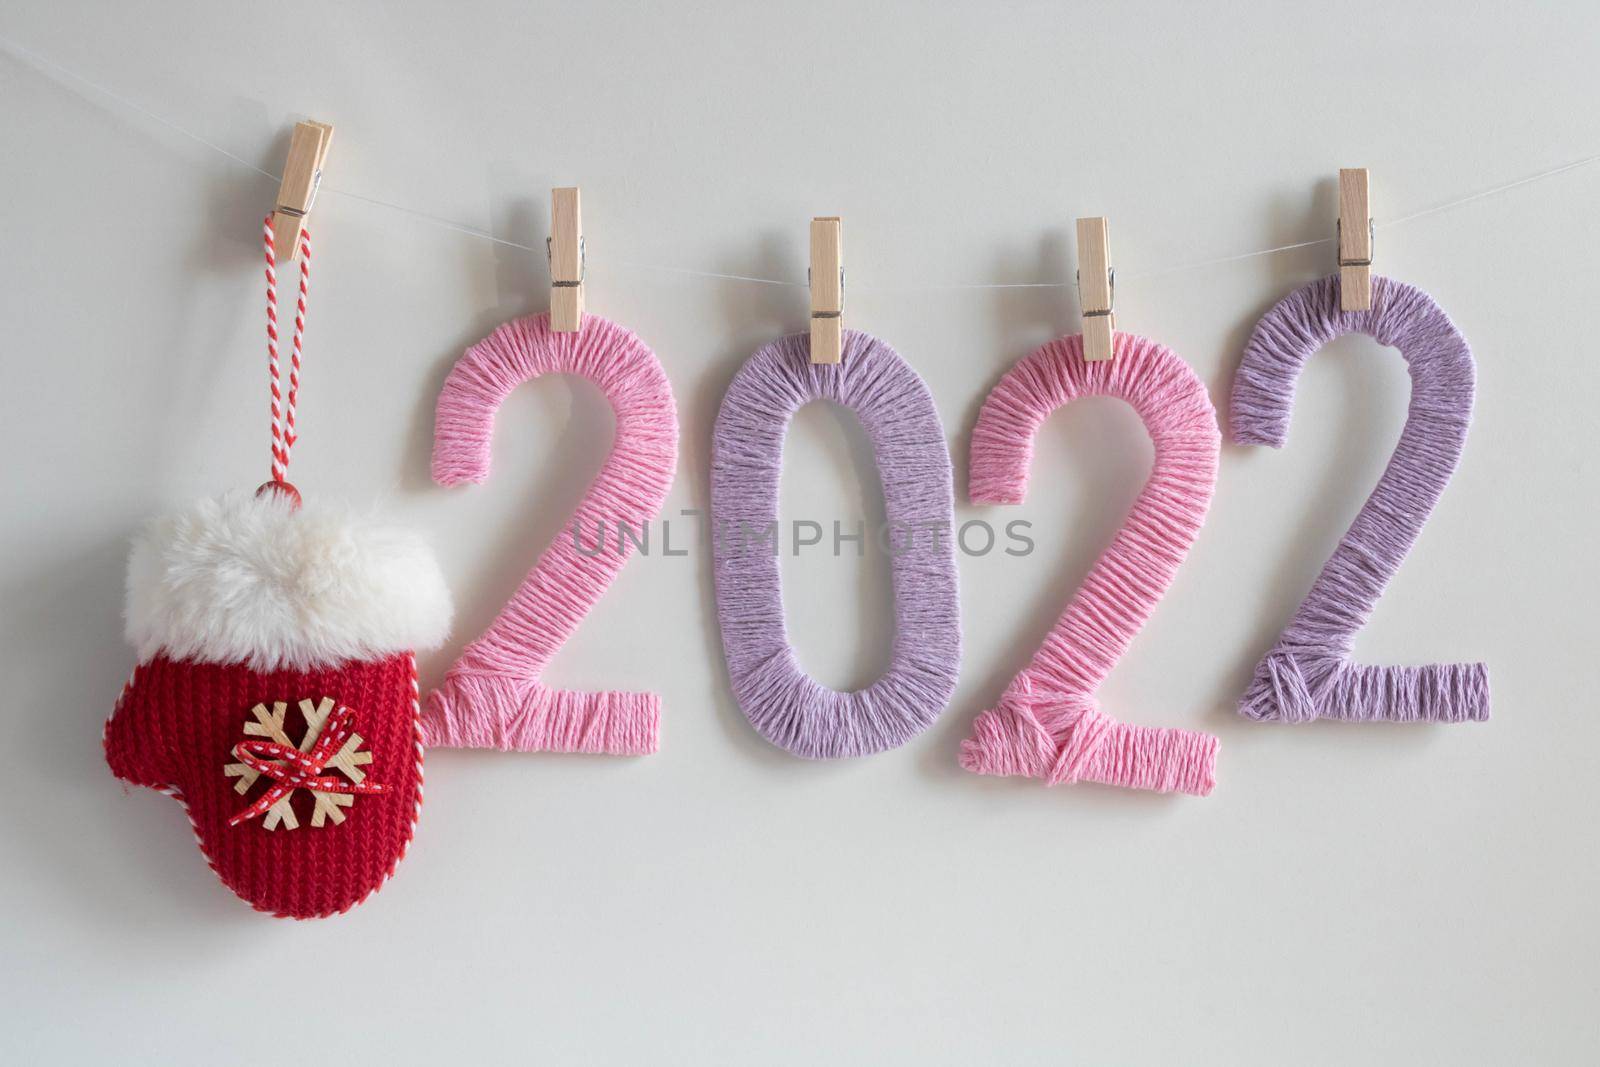 Knitted figures of 2022, made of pink and lilac threads, hang on clothespins on a white background with a red mitten. The concept of the New Year by lapushka62